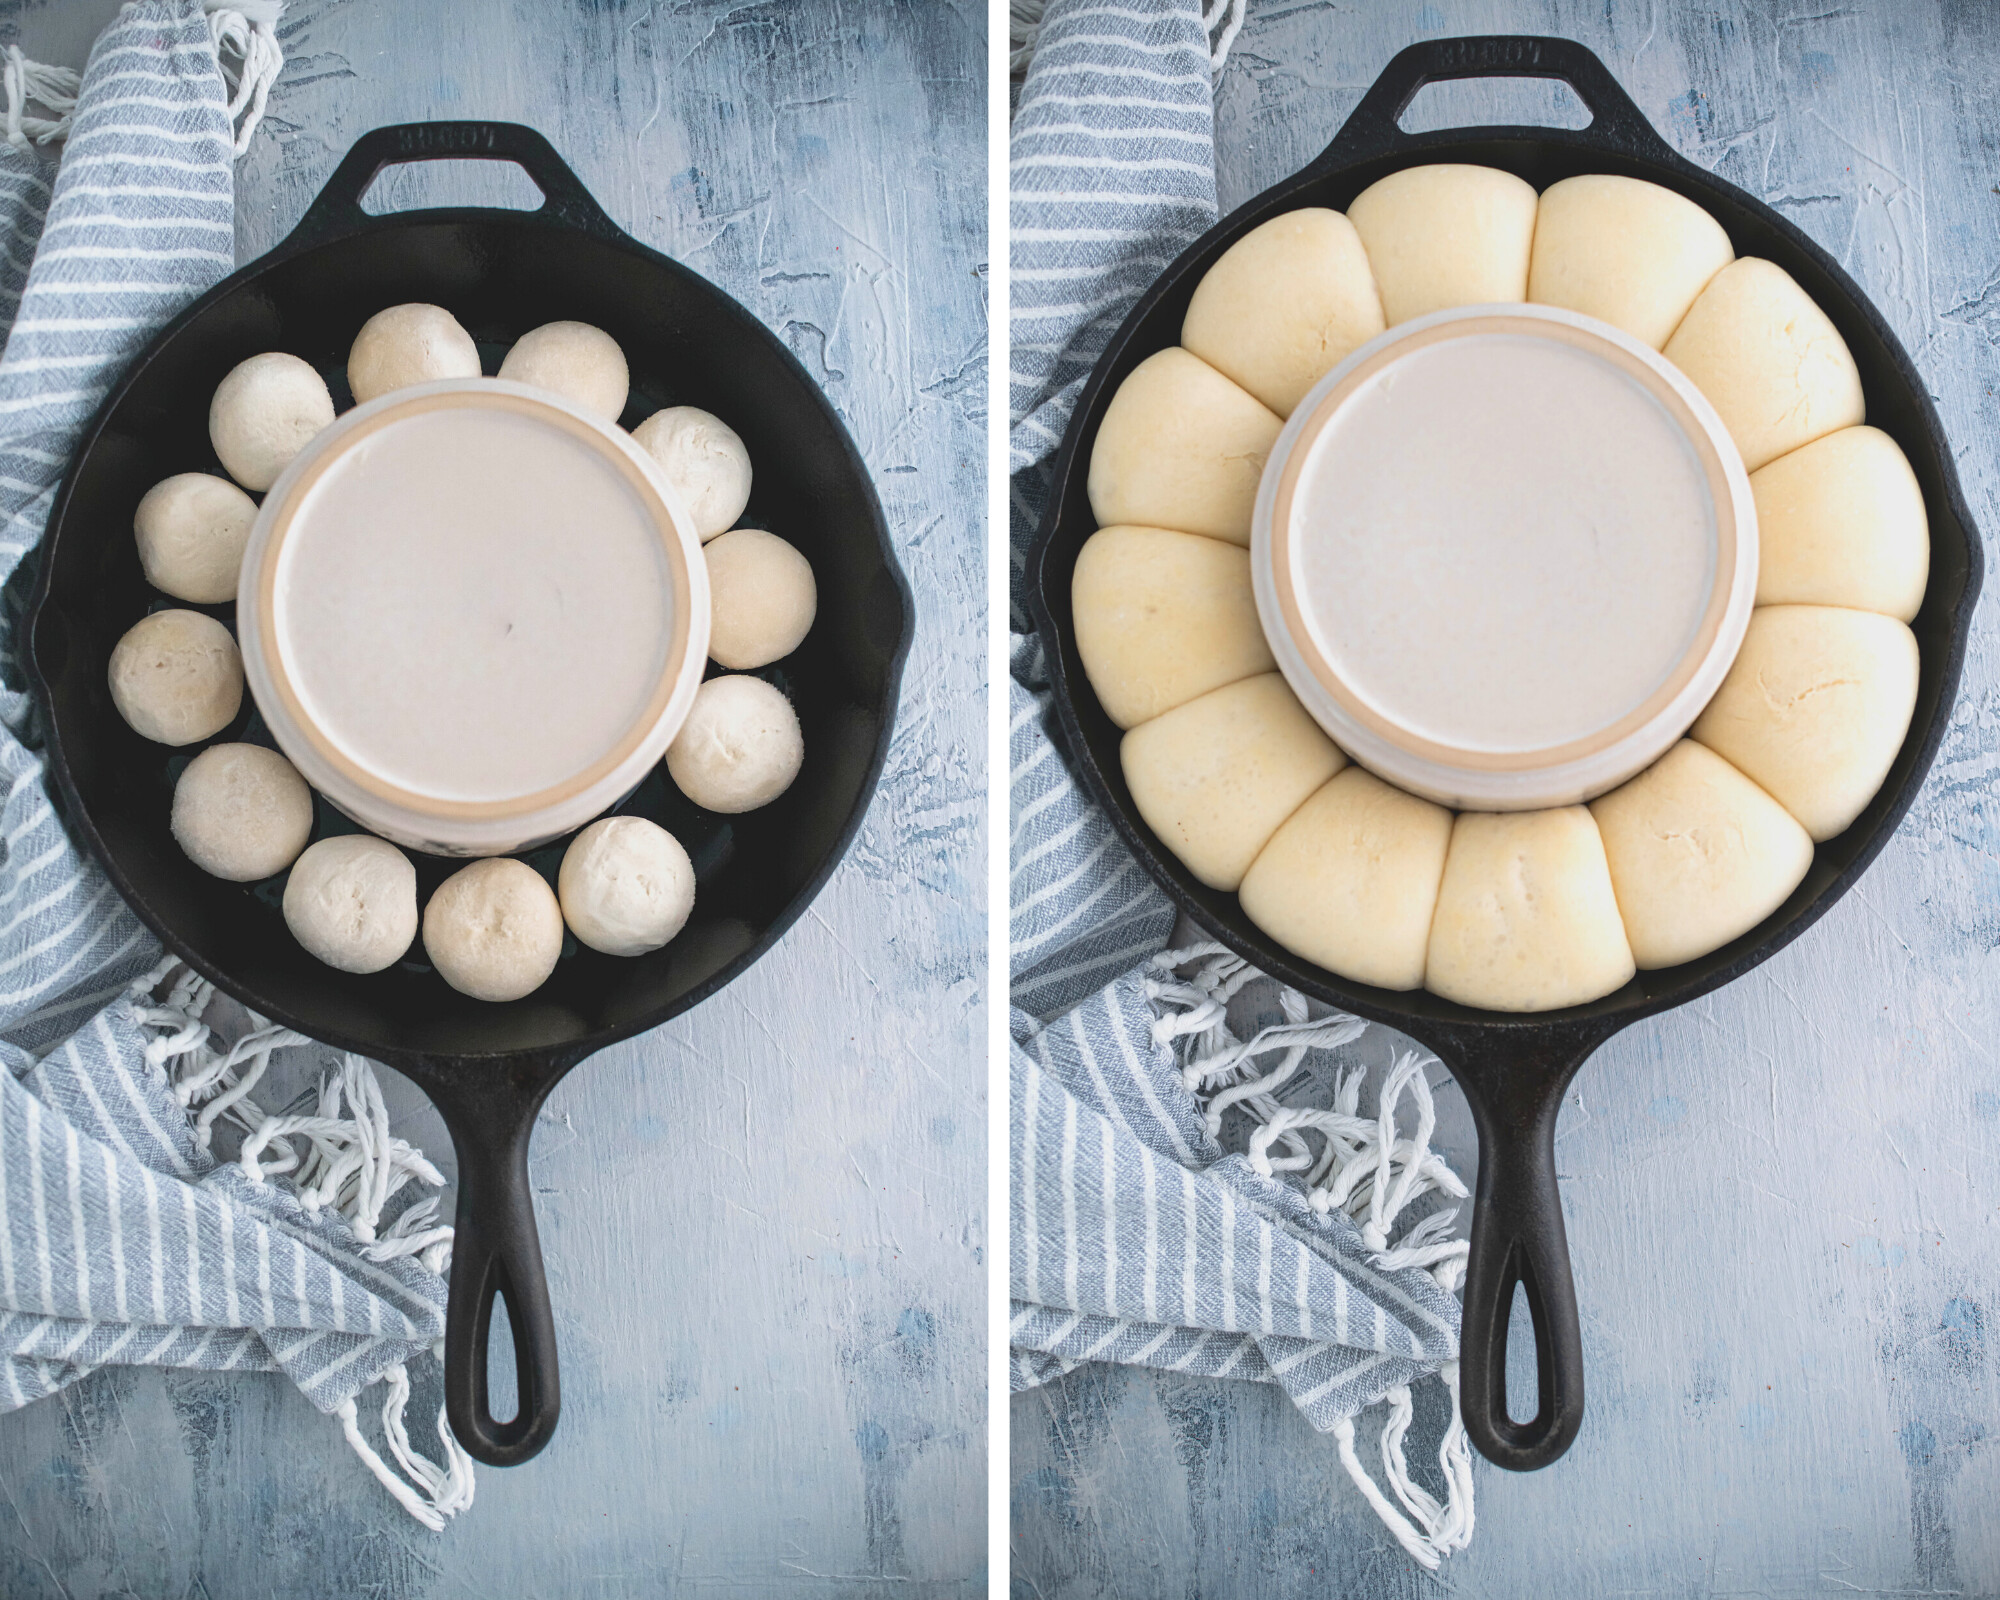 Two side by side vertical photos. First is frozen rolls in a cast iron skillet with a bowl in the center. Second is the rolls risen.